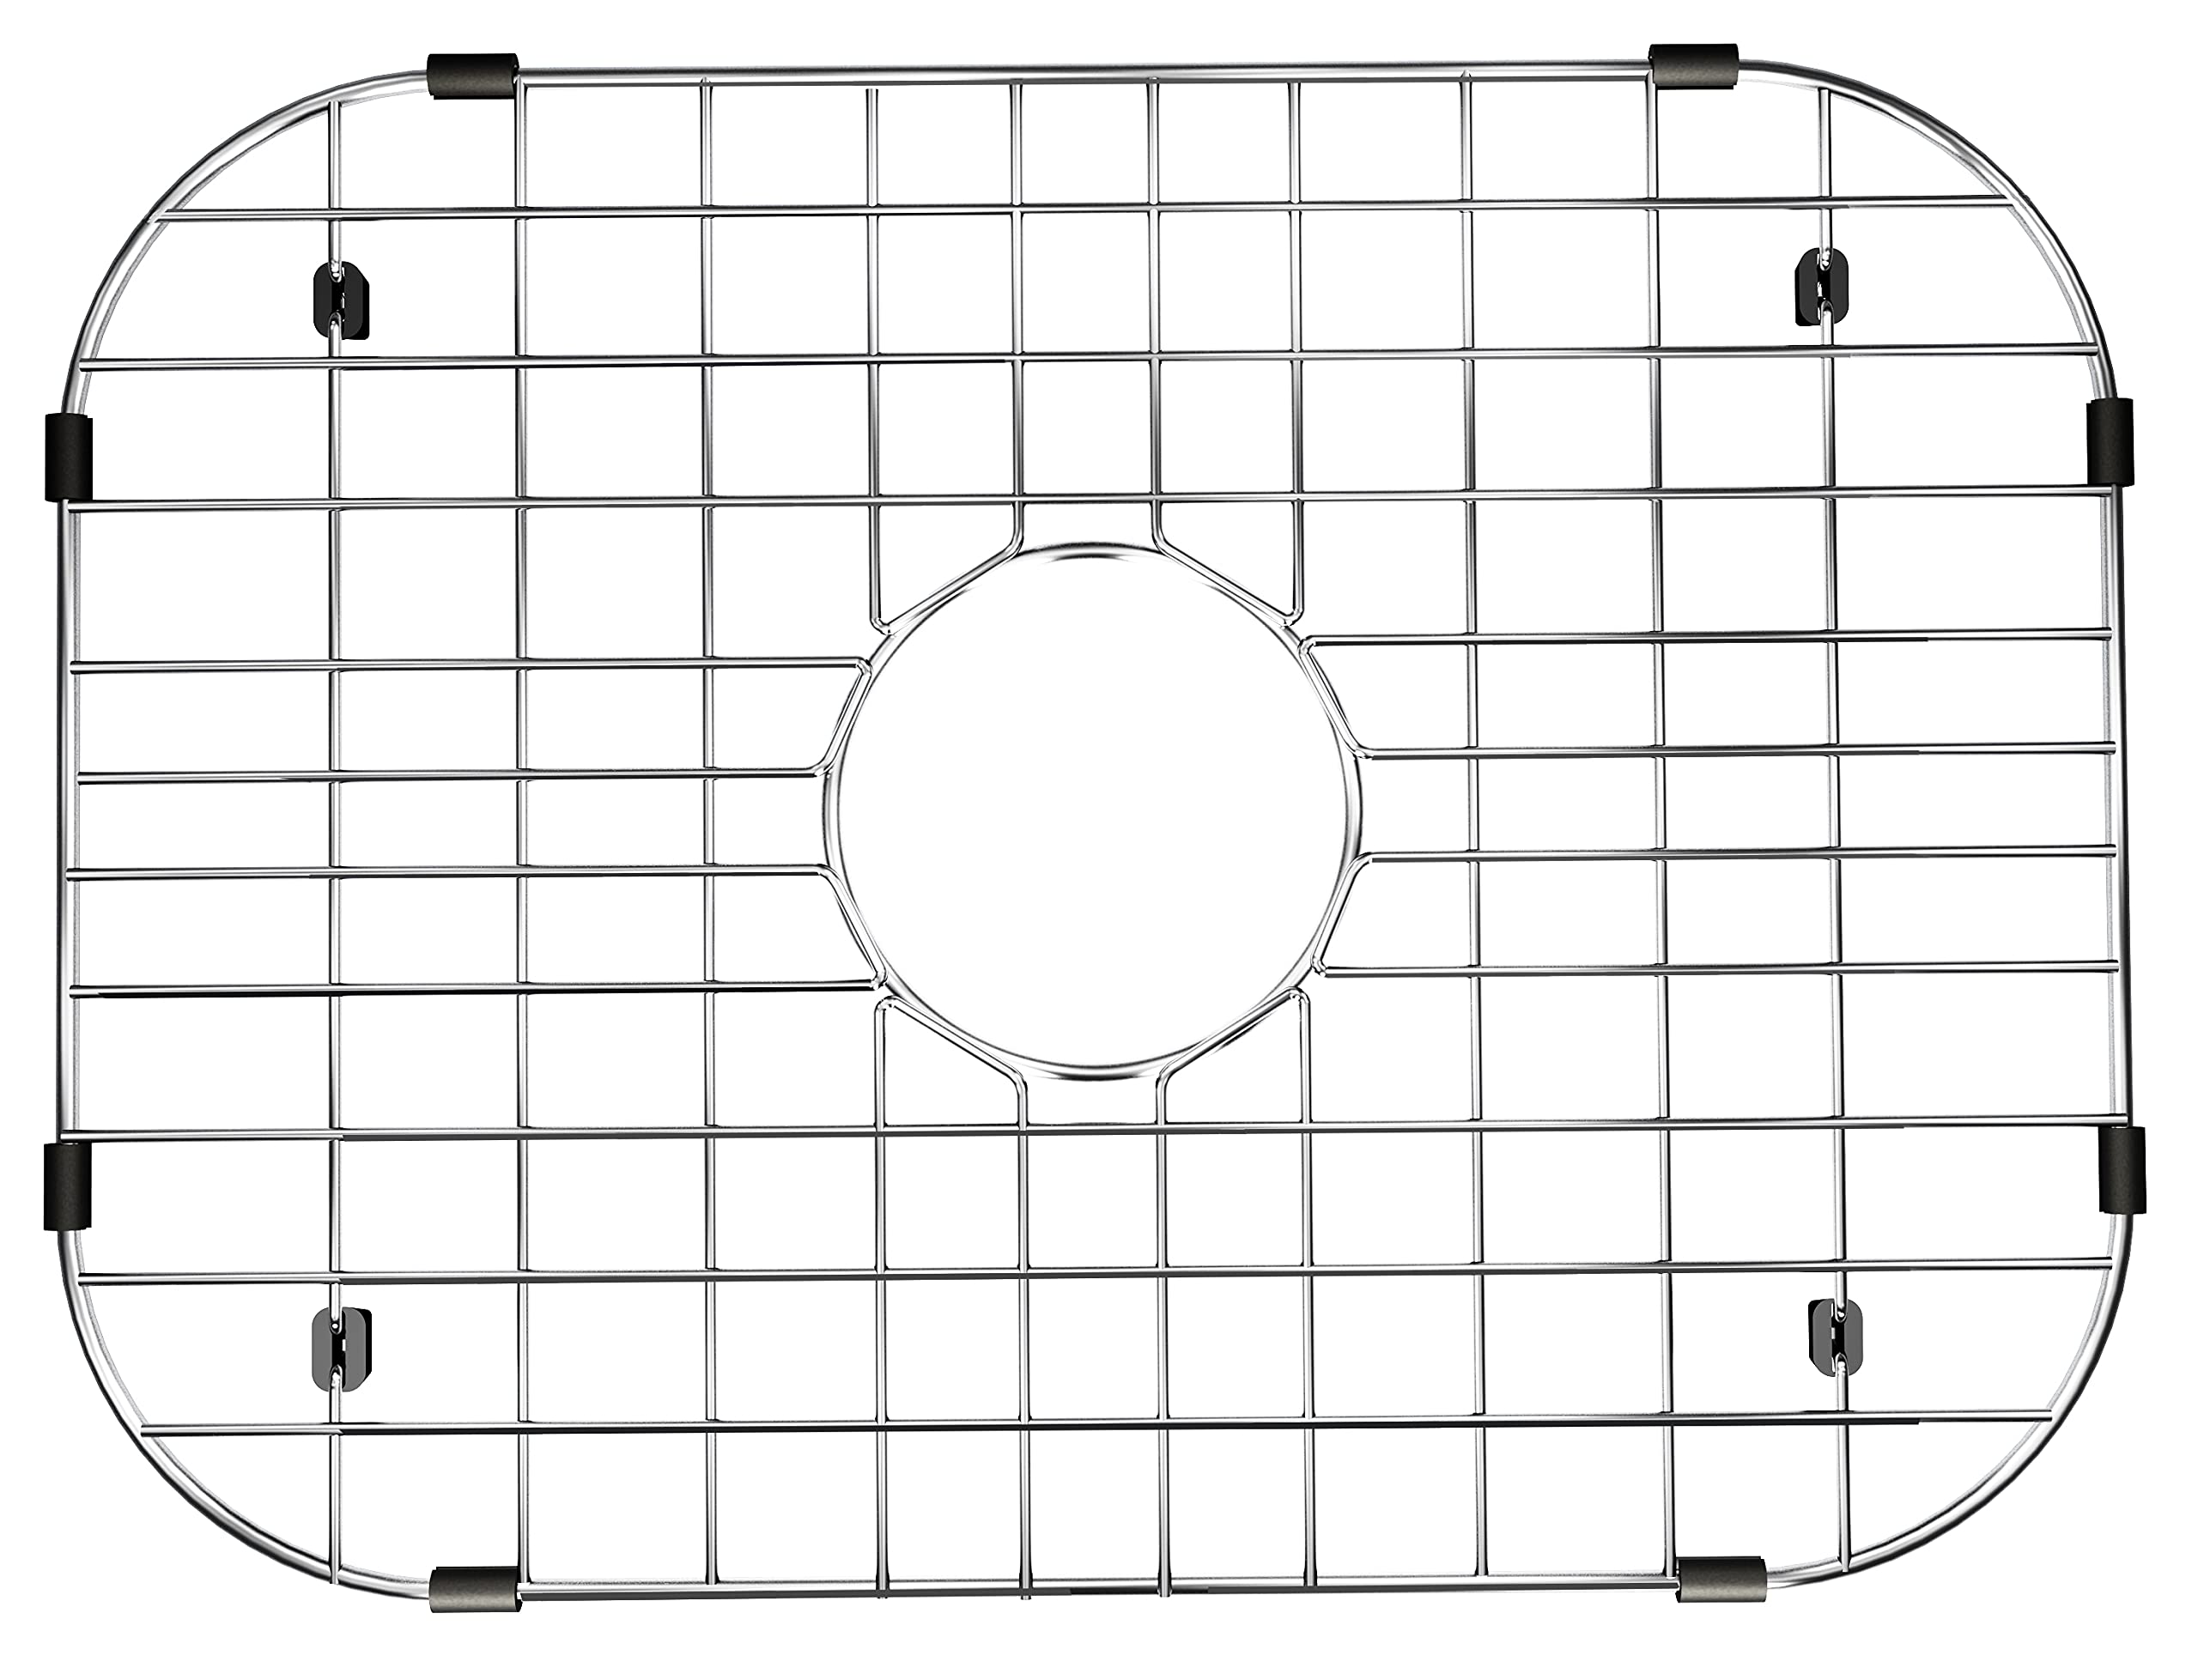 Alonsoo Sink Grid and Sink Rack Protectors, Stainless Steel 18-1/8" L x 13-3/8" Sink Grids for Bottom of Kitchen Sink Drain with Corner Radius, Stainless Steel